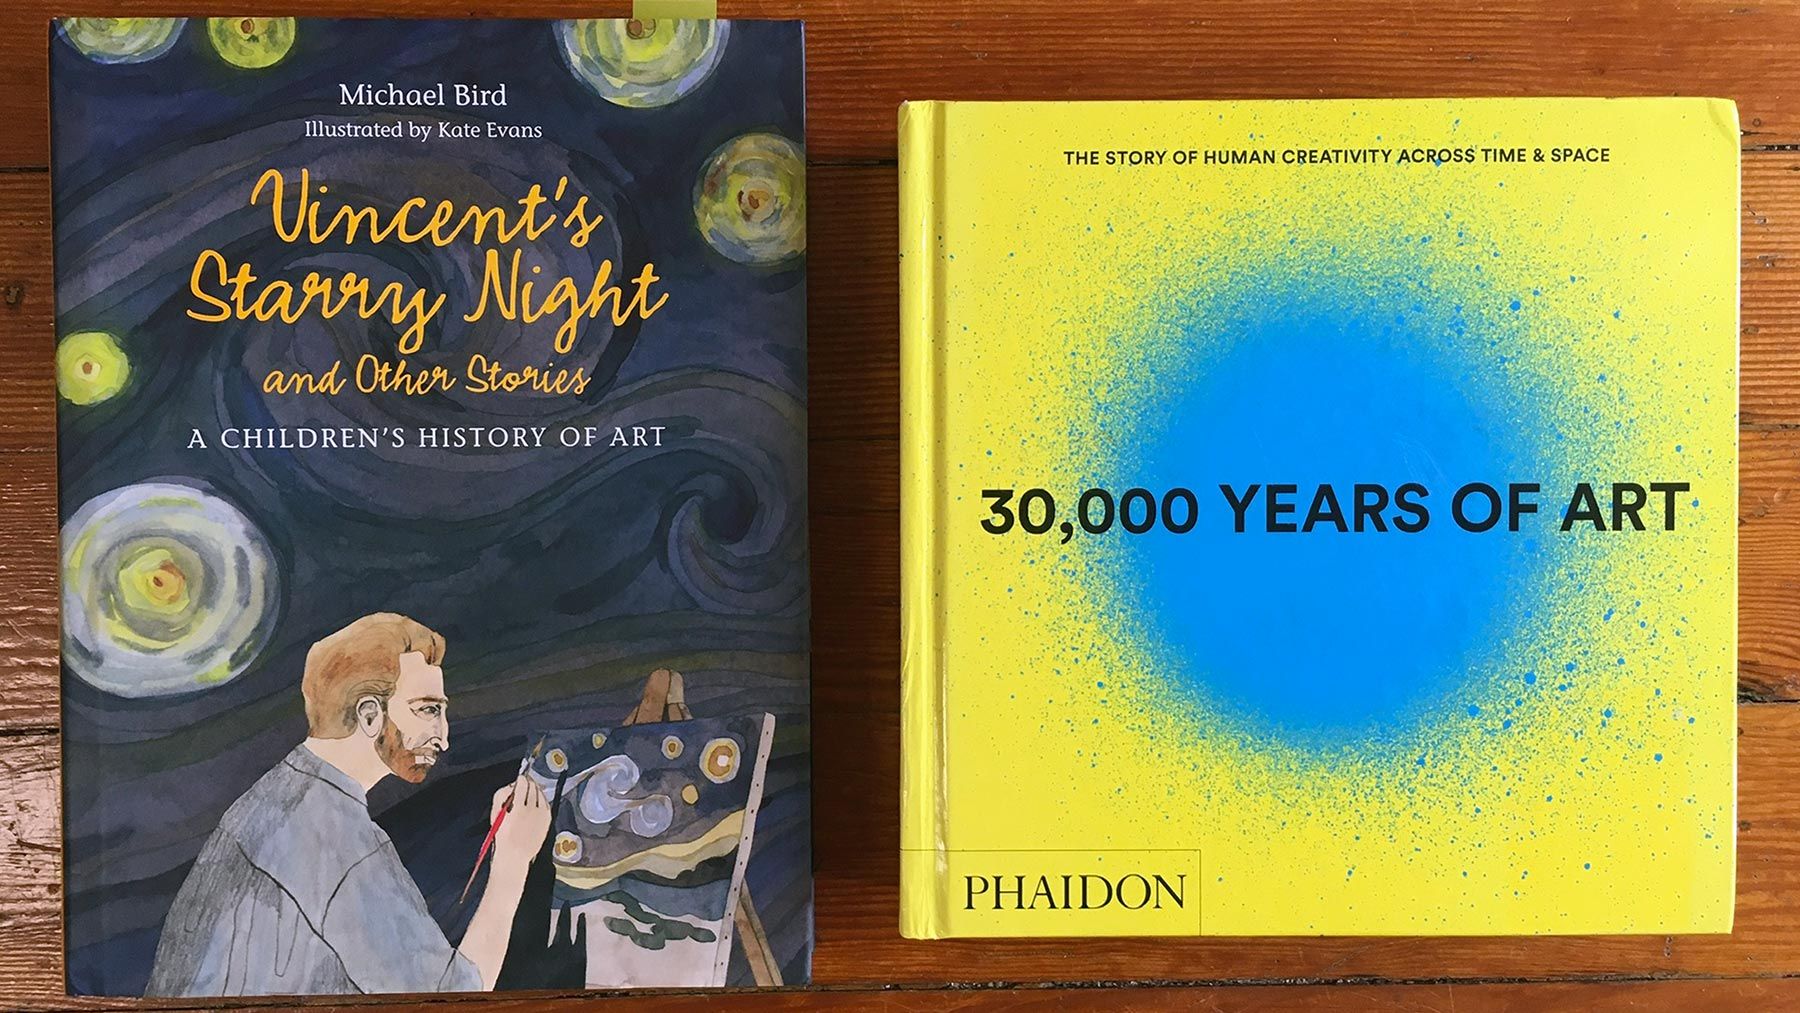 Two hardcover books: Vincent's Starry Night, and 30,000 Years of Art